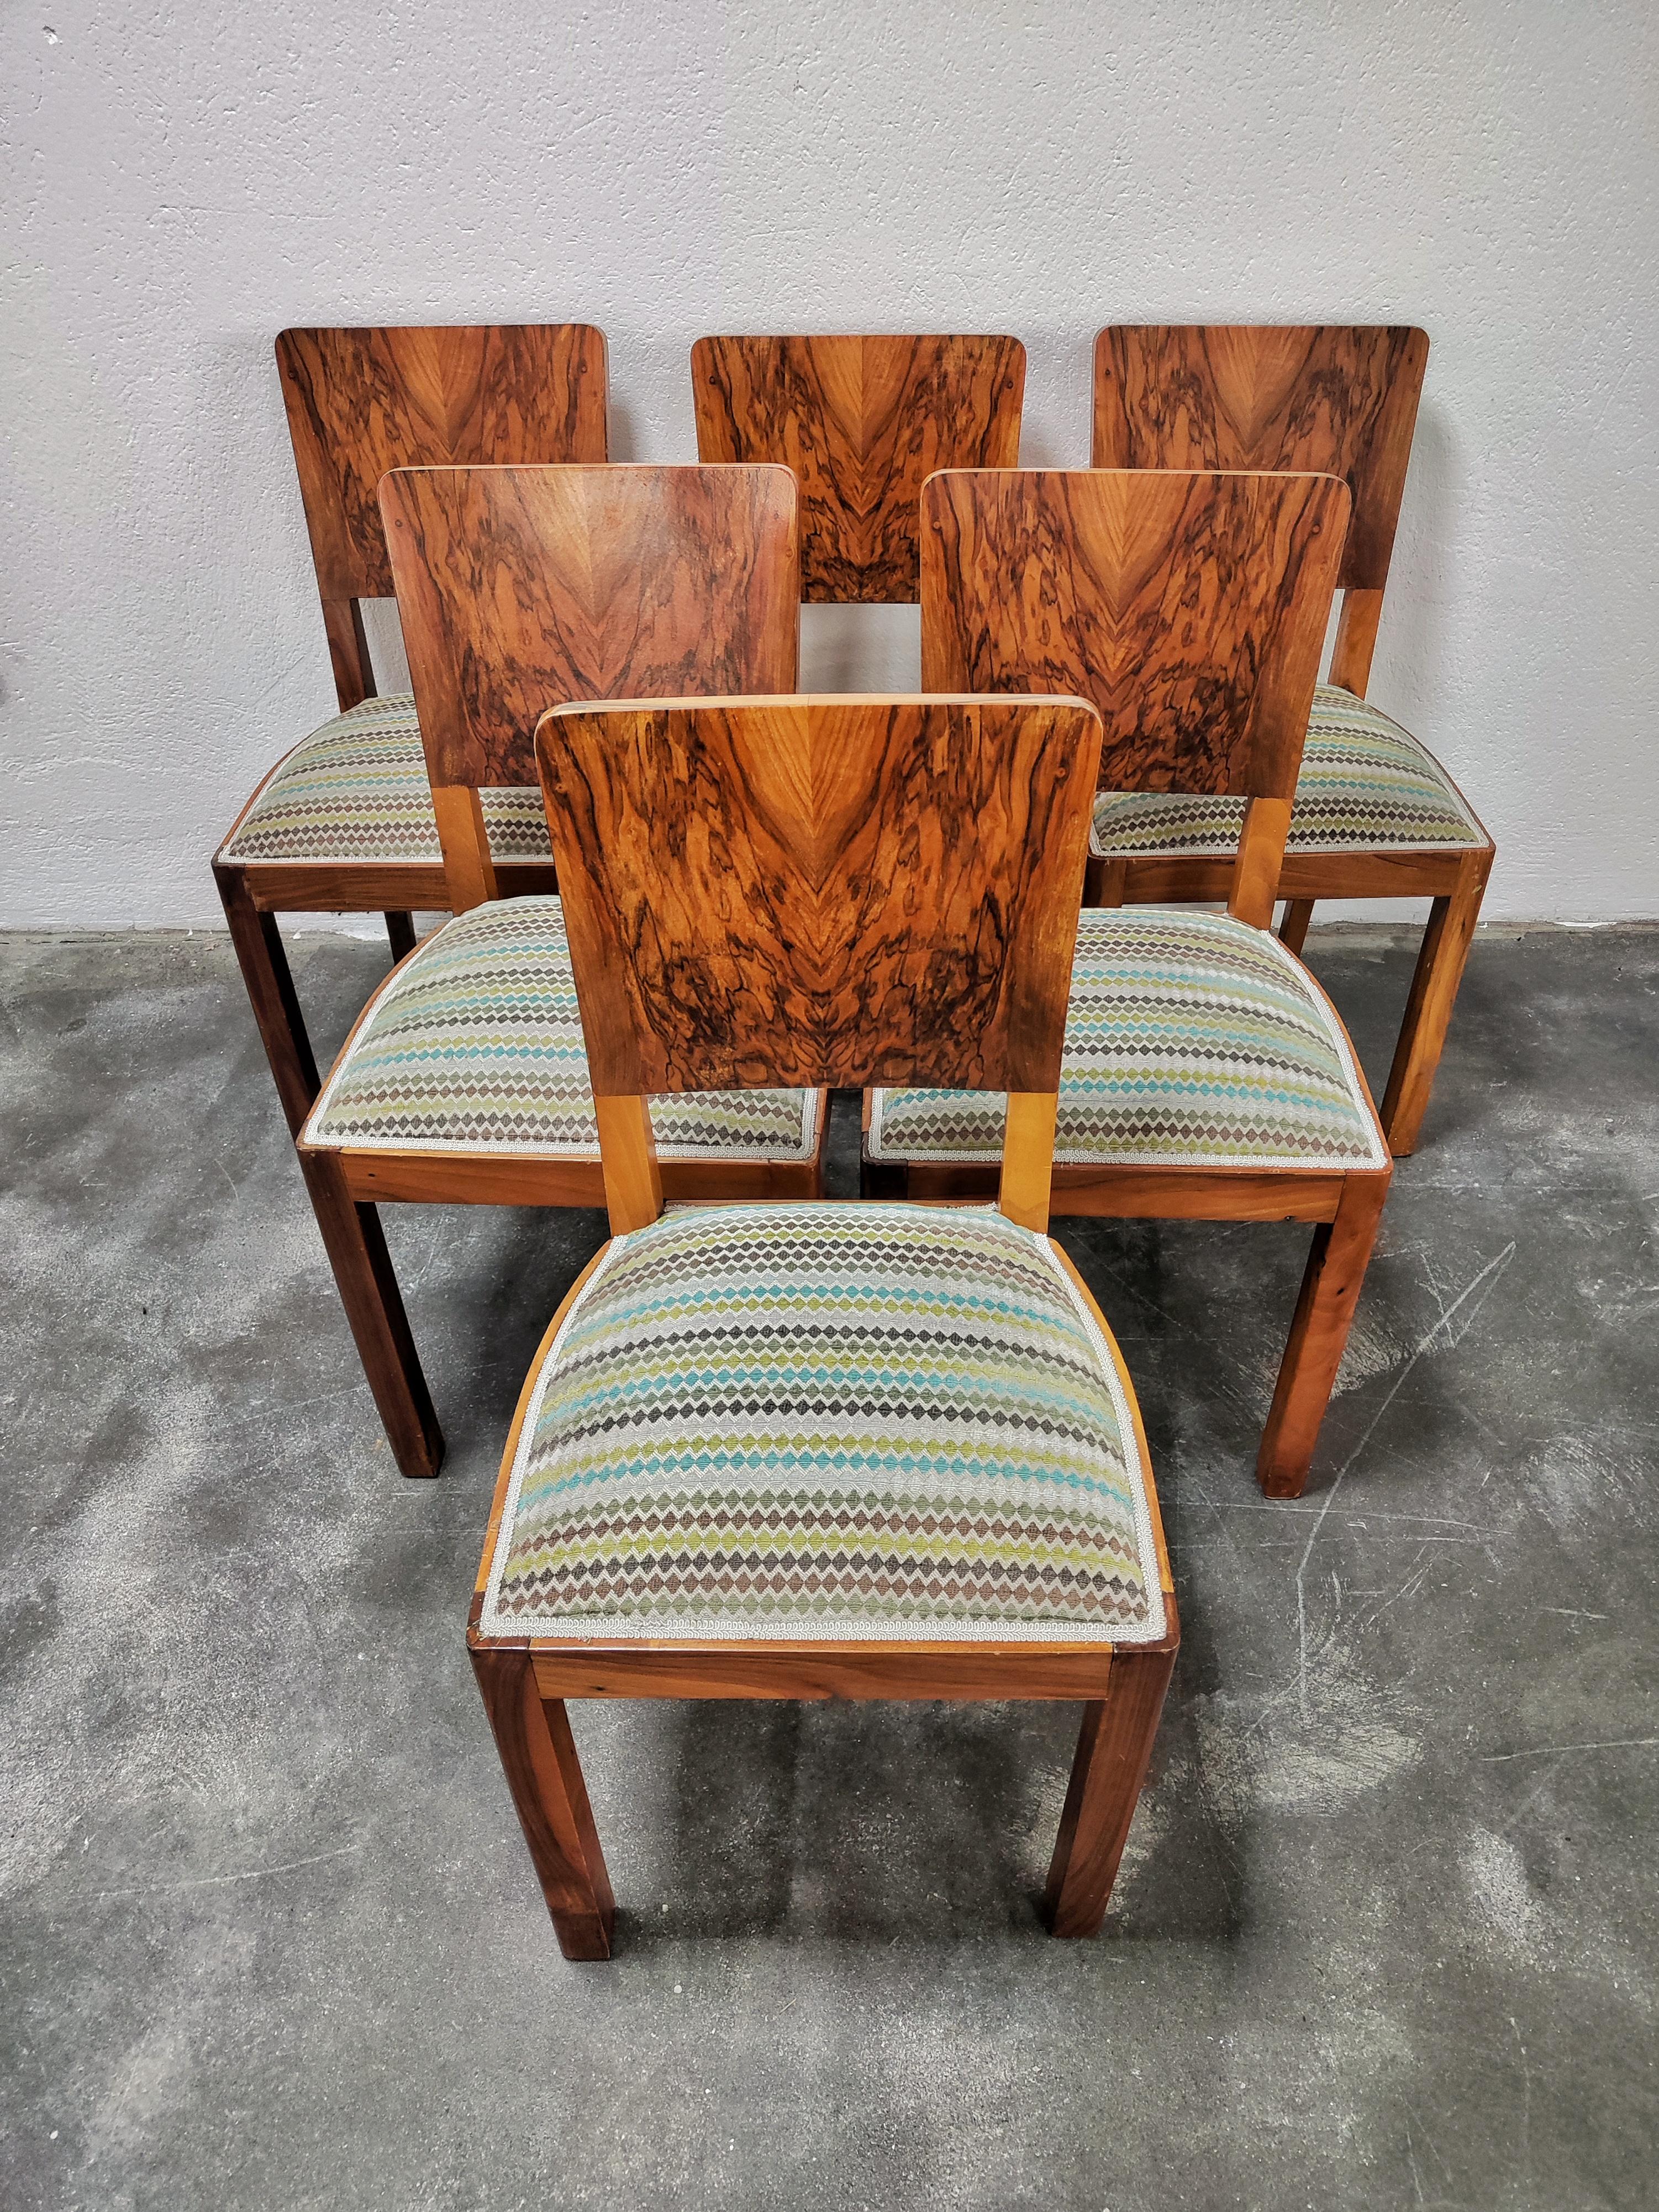 In this listing you will find a set of gorgeous Art Deco dining chairs. They feature the frames done in walnut, while the backrests have been veneered in walnut roots veneer, which is famous for its lavish and dramatic patterns. The chairs have been